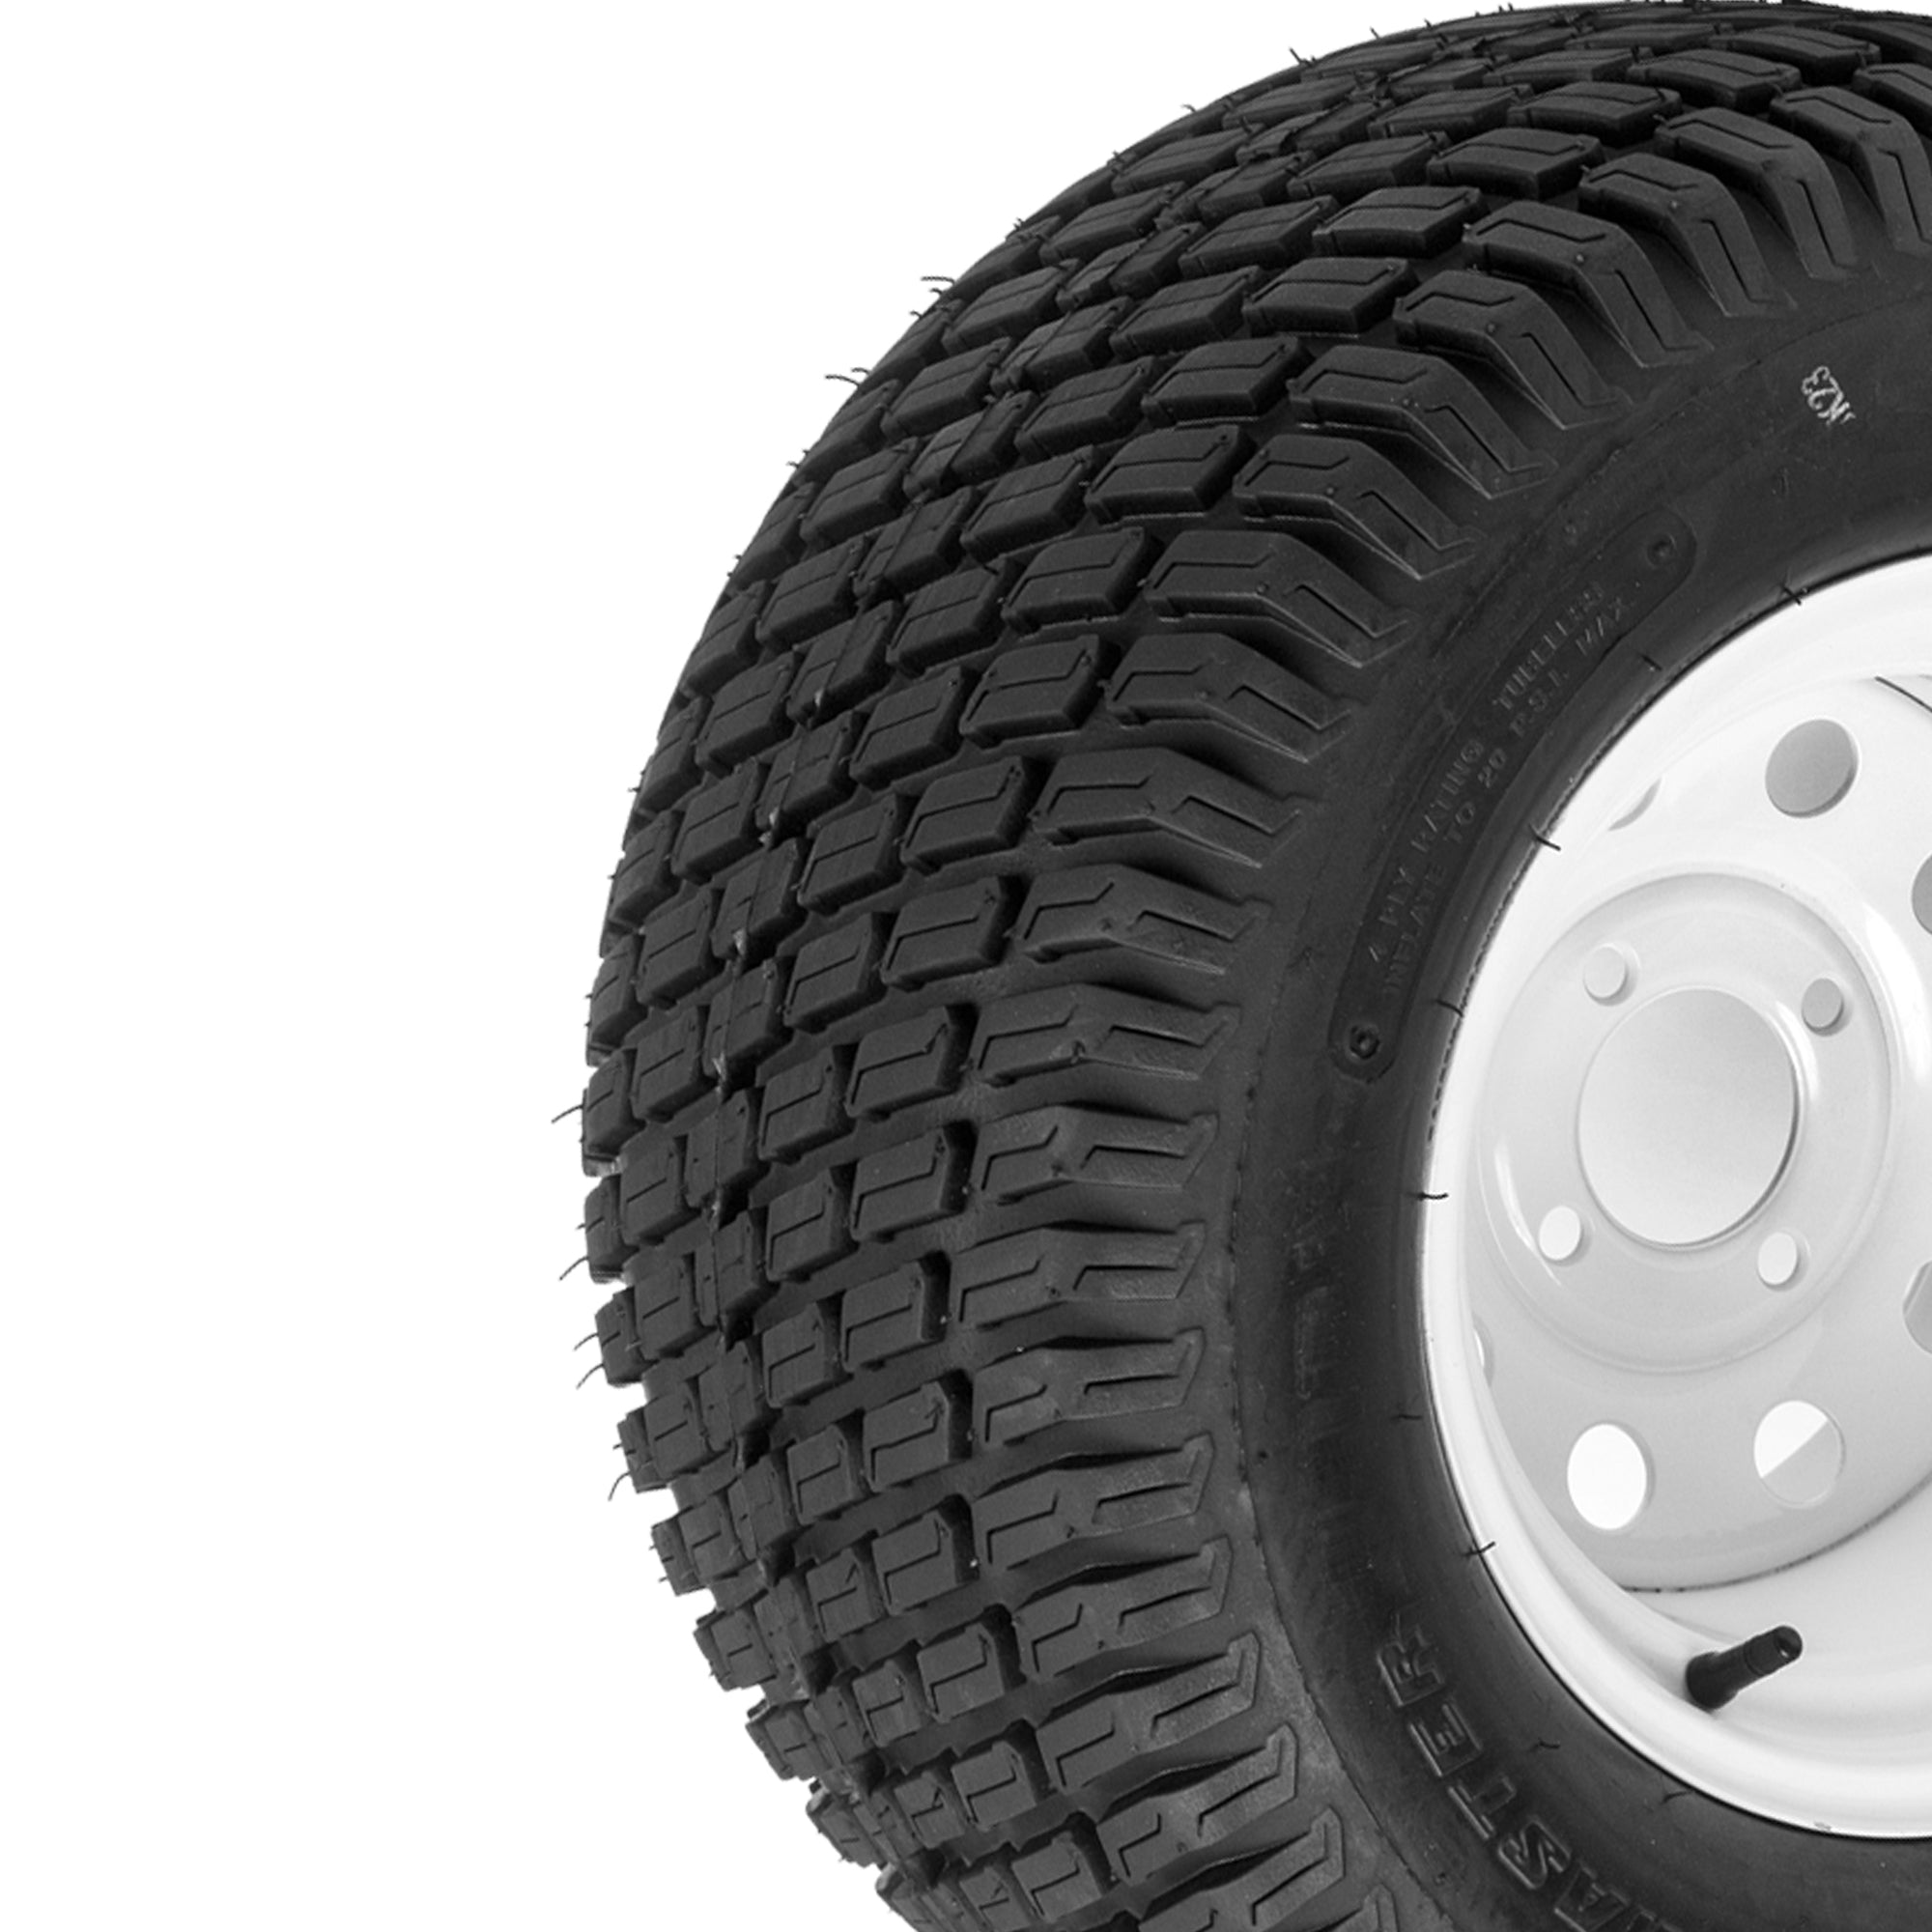 109-8972 Wheel and Tire Lazer Z AS XP S X Series 1-633970 2 Pack